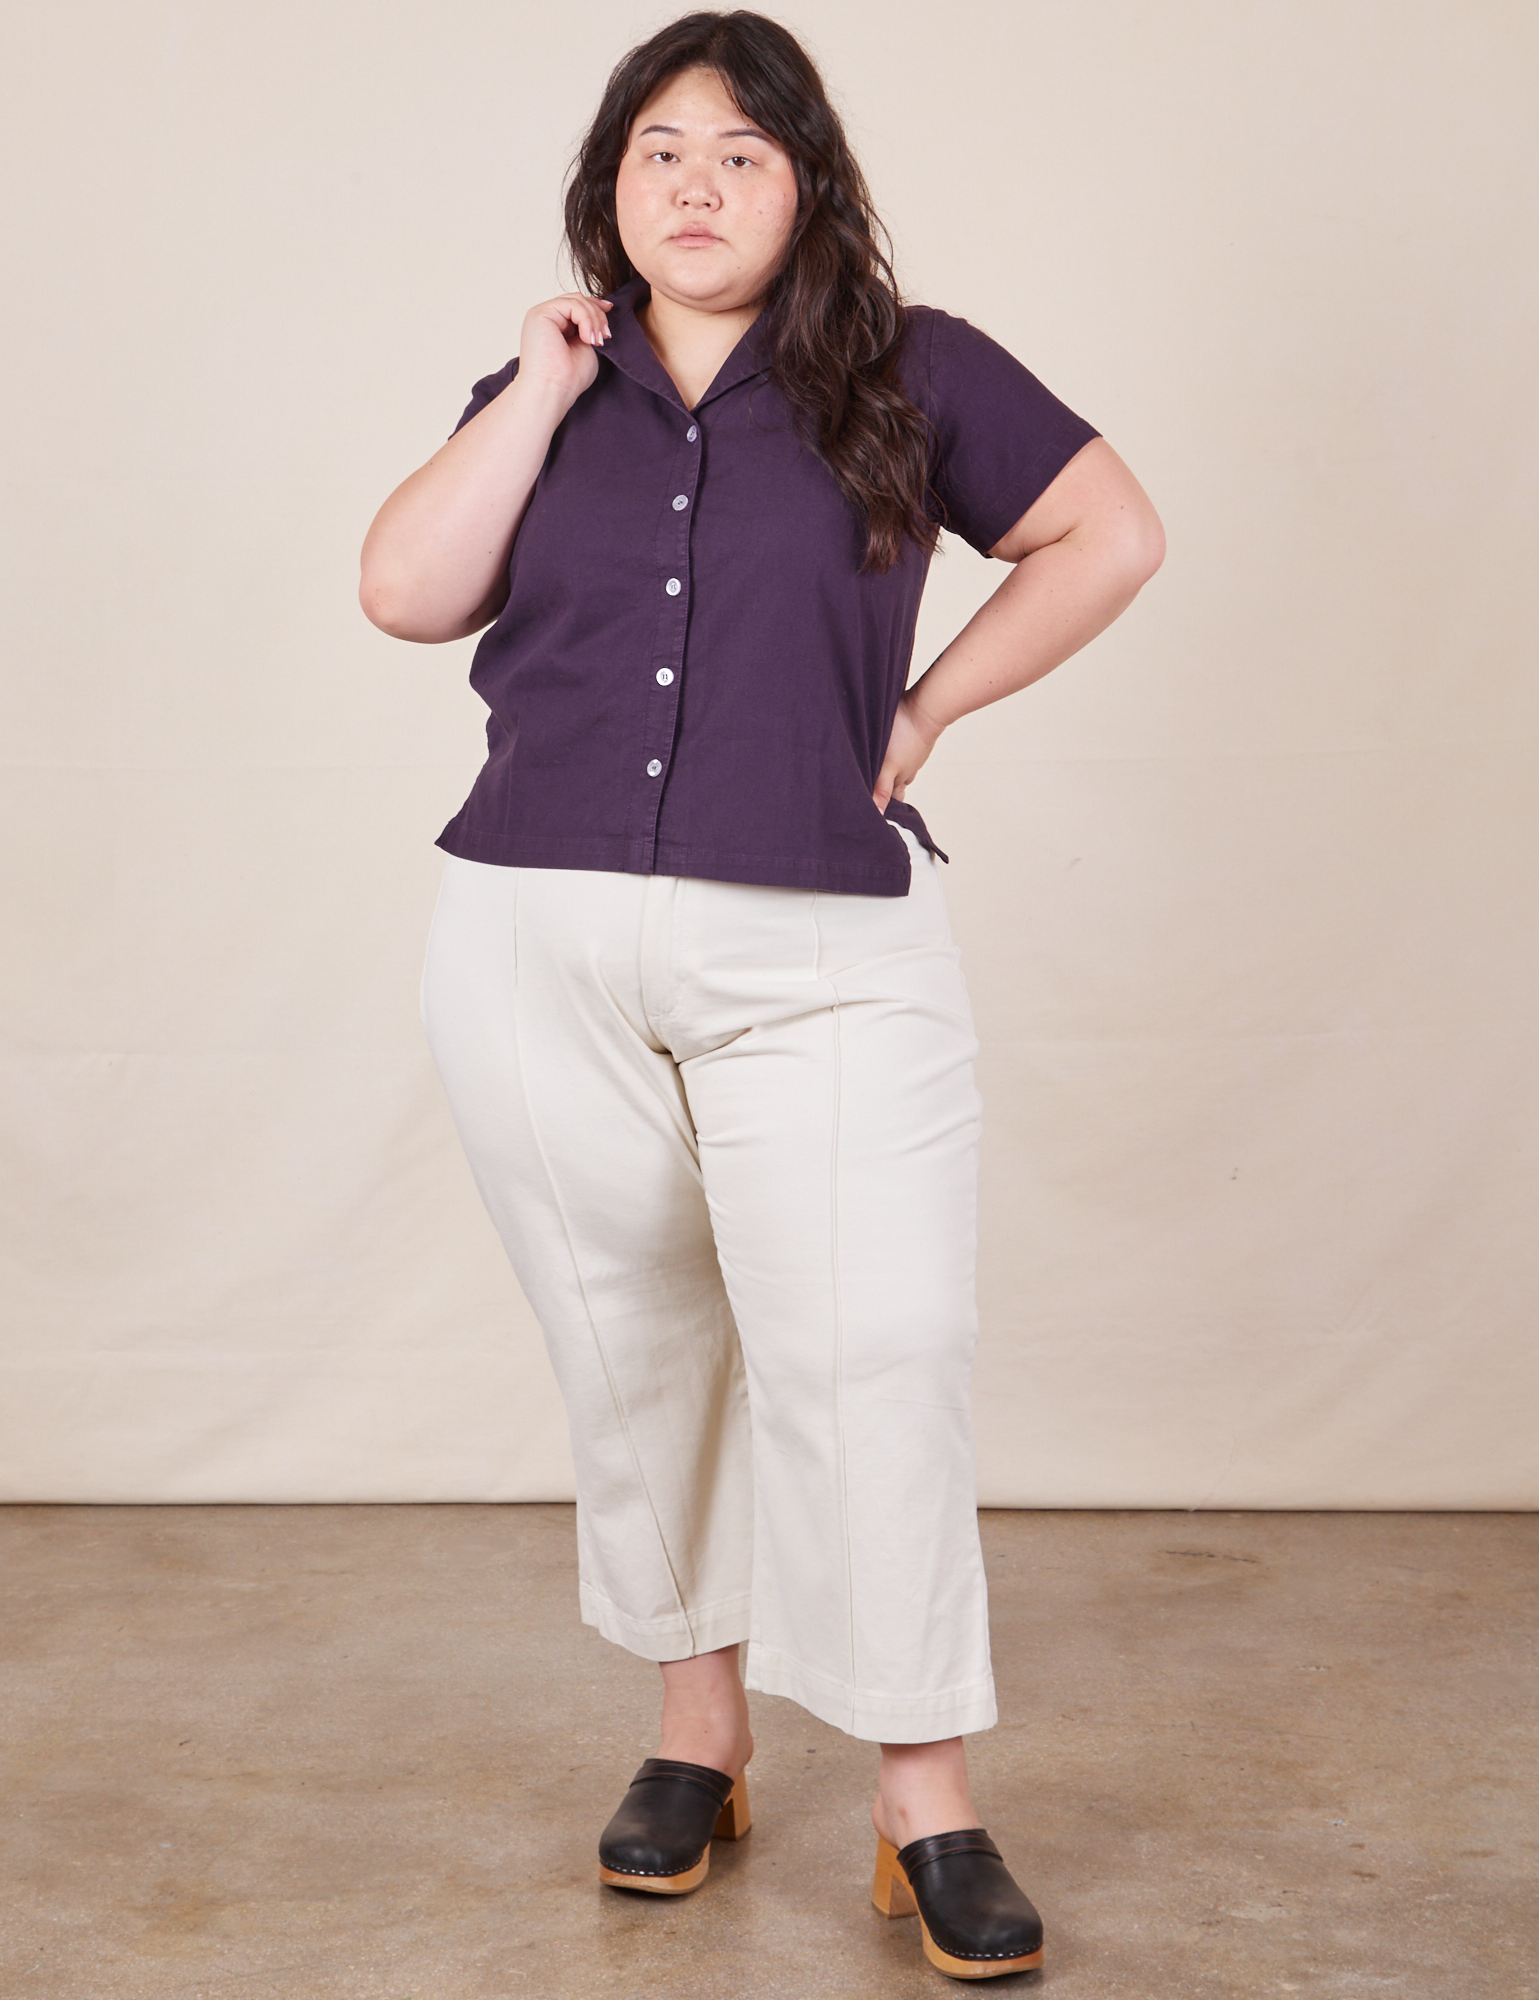 Alex is wearing Pantry Button-Up in Nebula Purple and vintage tee off-white petite Western Pants